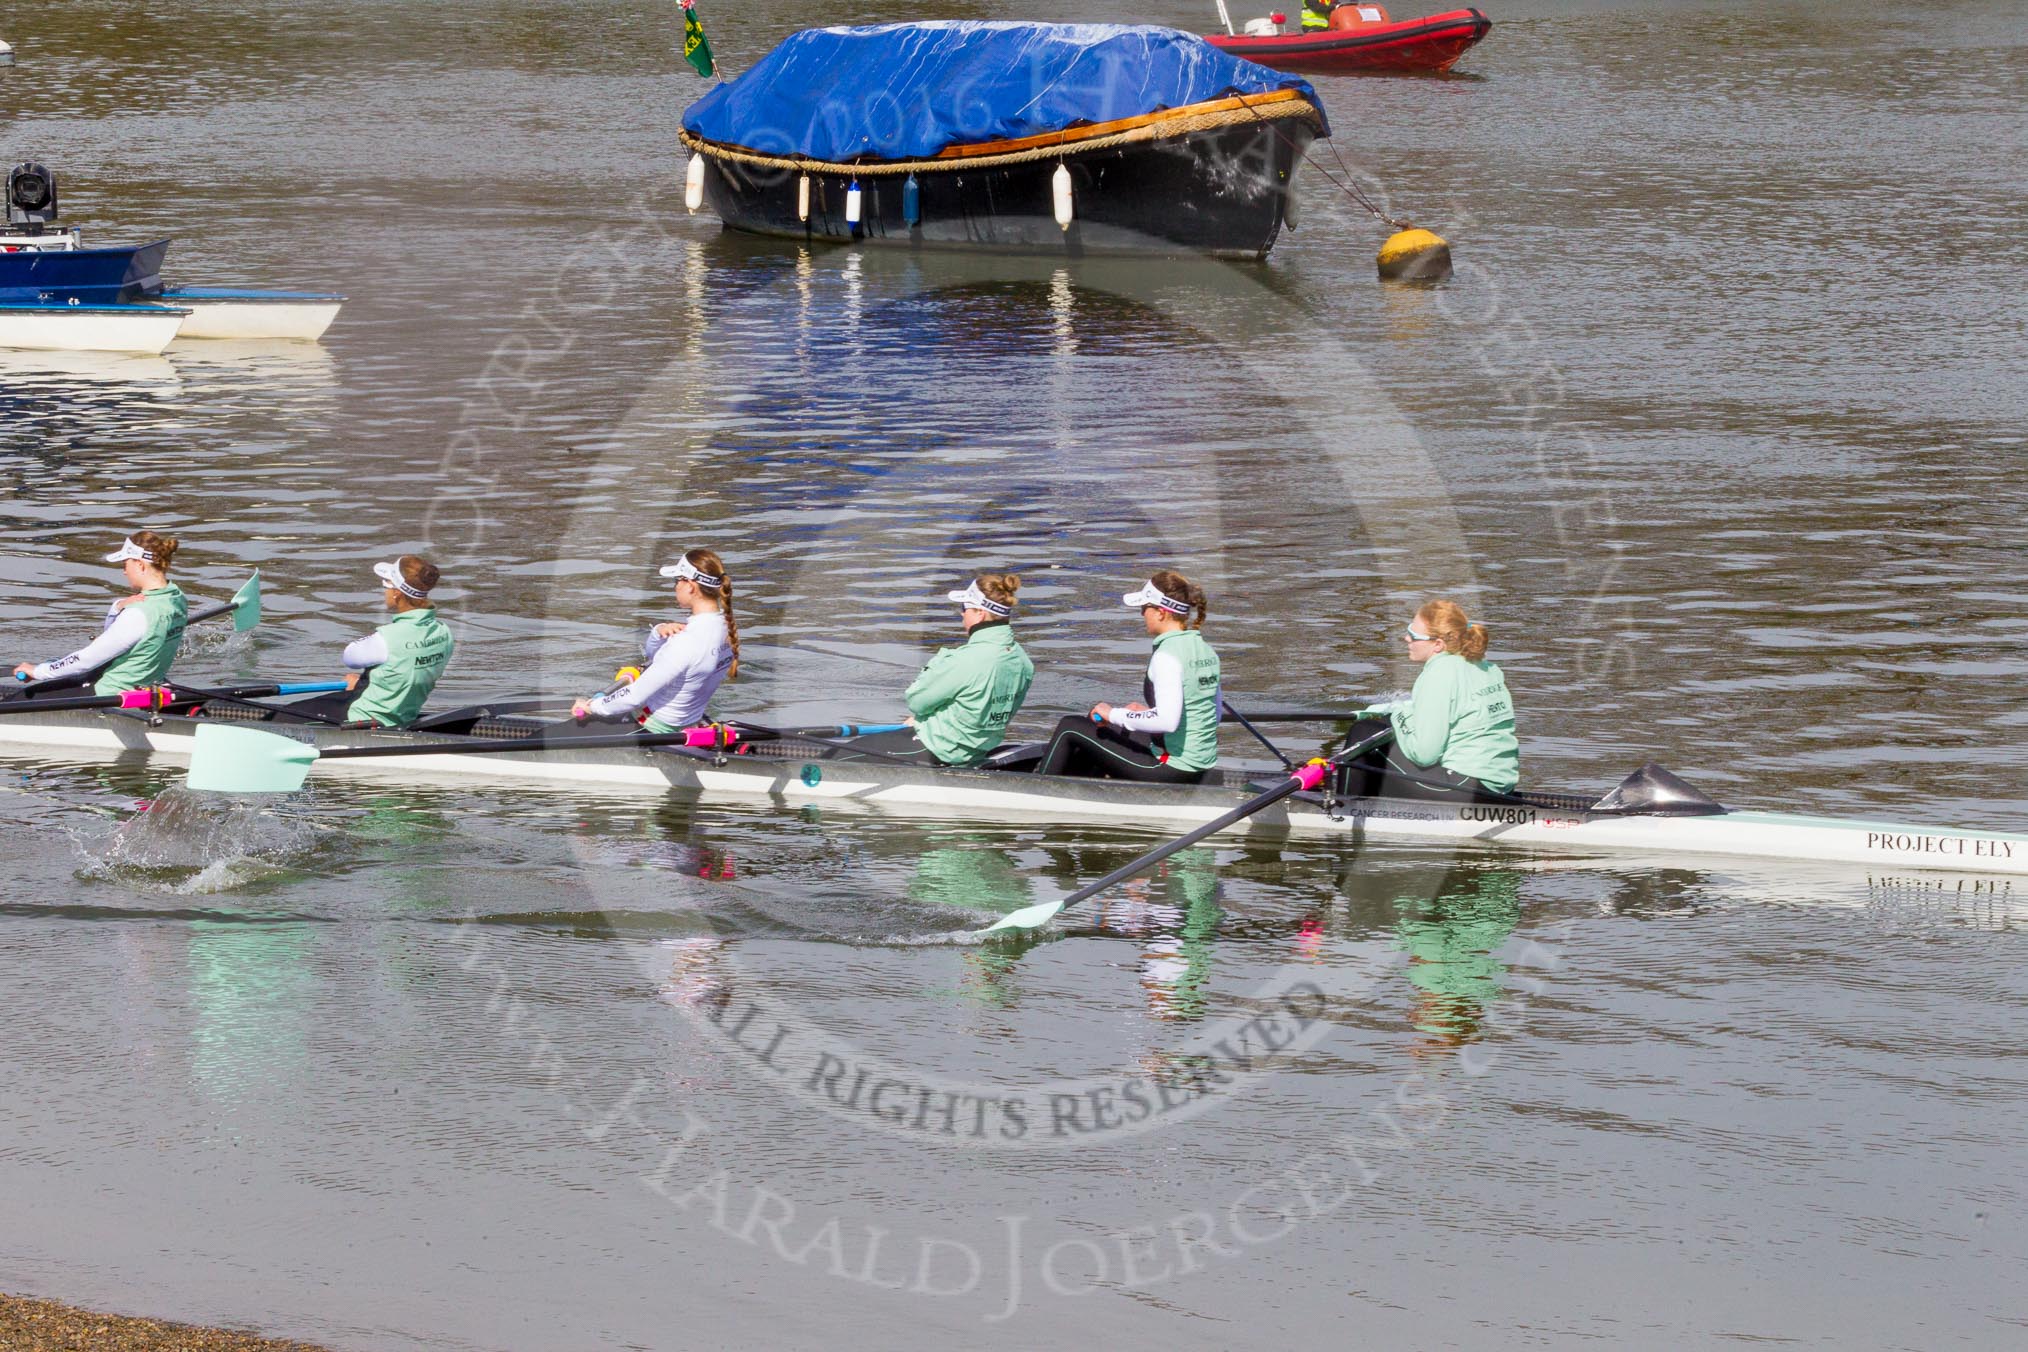 The Boat Race season 2016 -  The Cancer Research Women's Boat Race.
River Thames between Putney Bridge and Mortlake,
London SW15,

United Kingdom,
on 27 March 2016 at 13:29, image #105